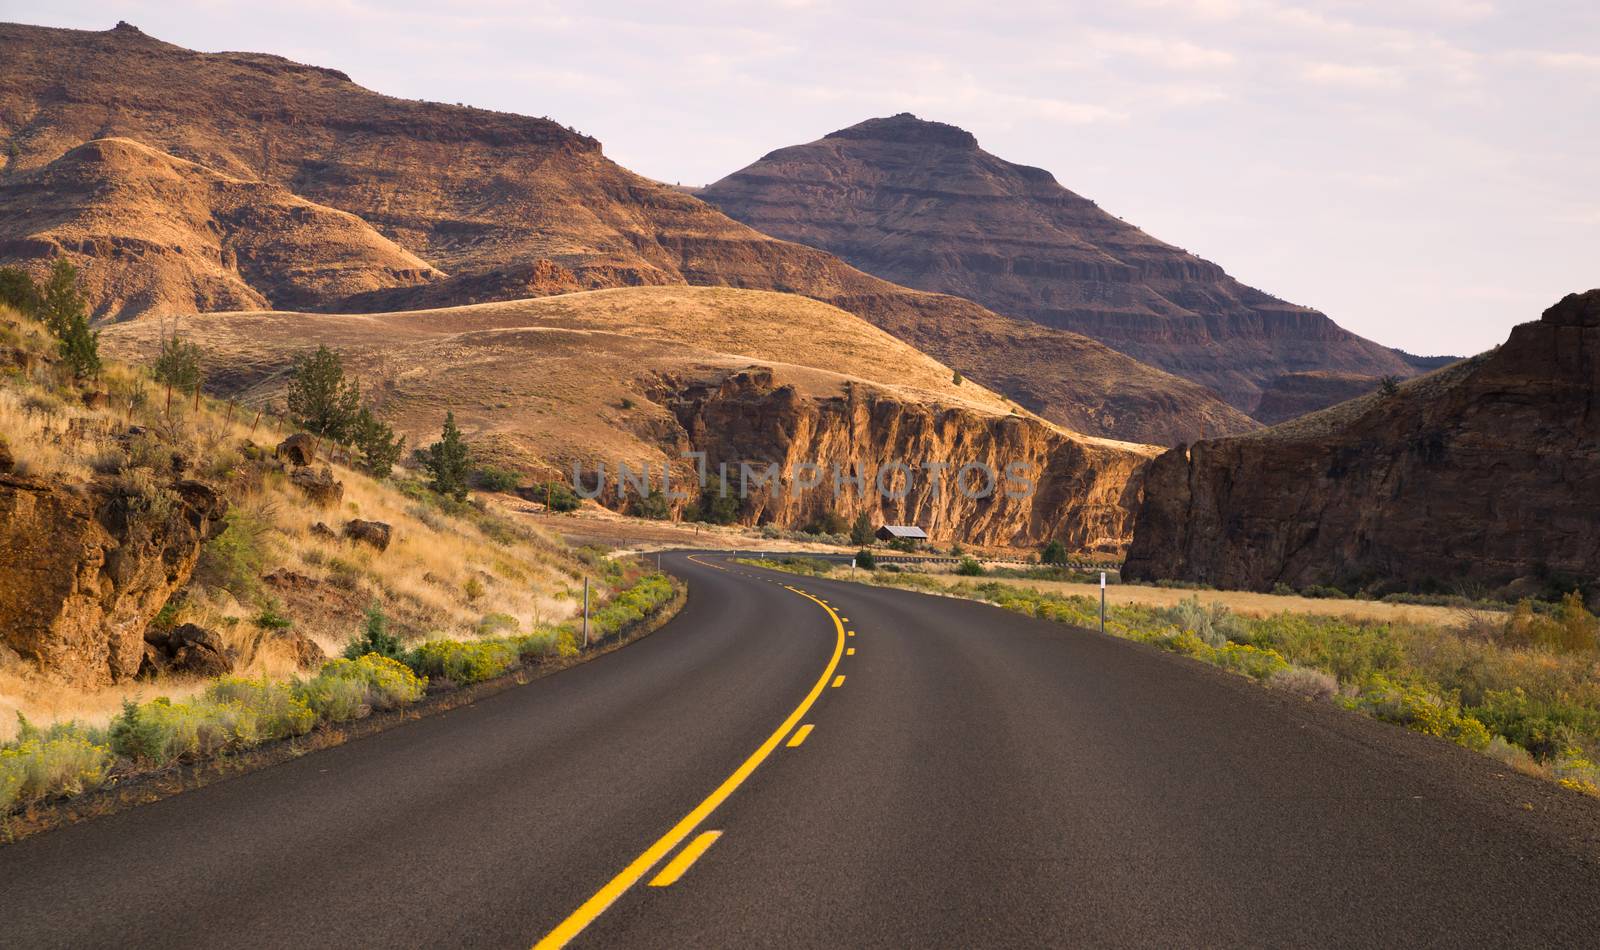 Curves Frequent Two Lane Highway John Day Fossil Beds by ChrisBoswell